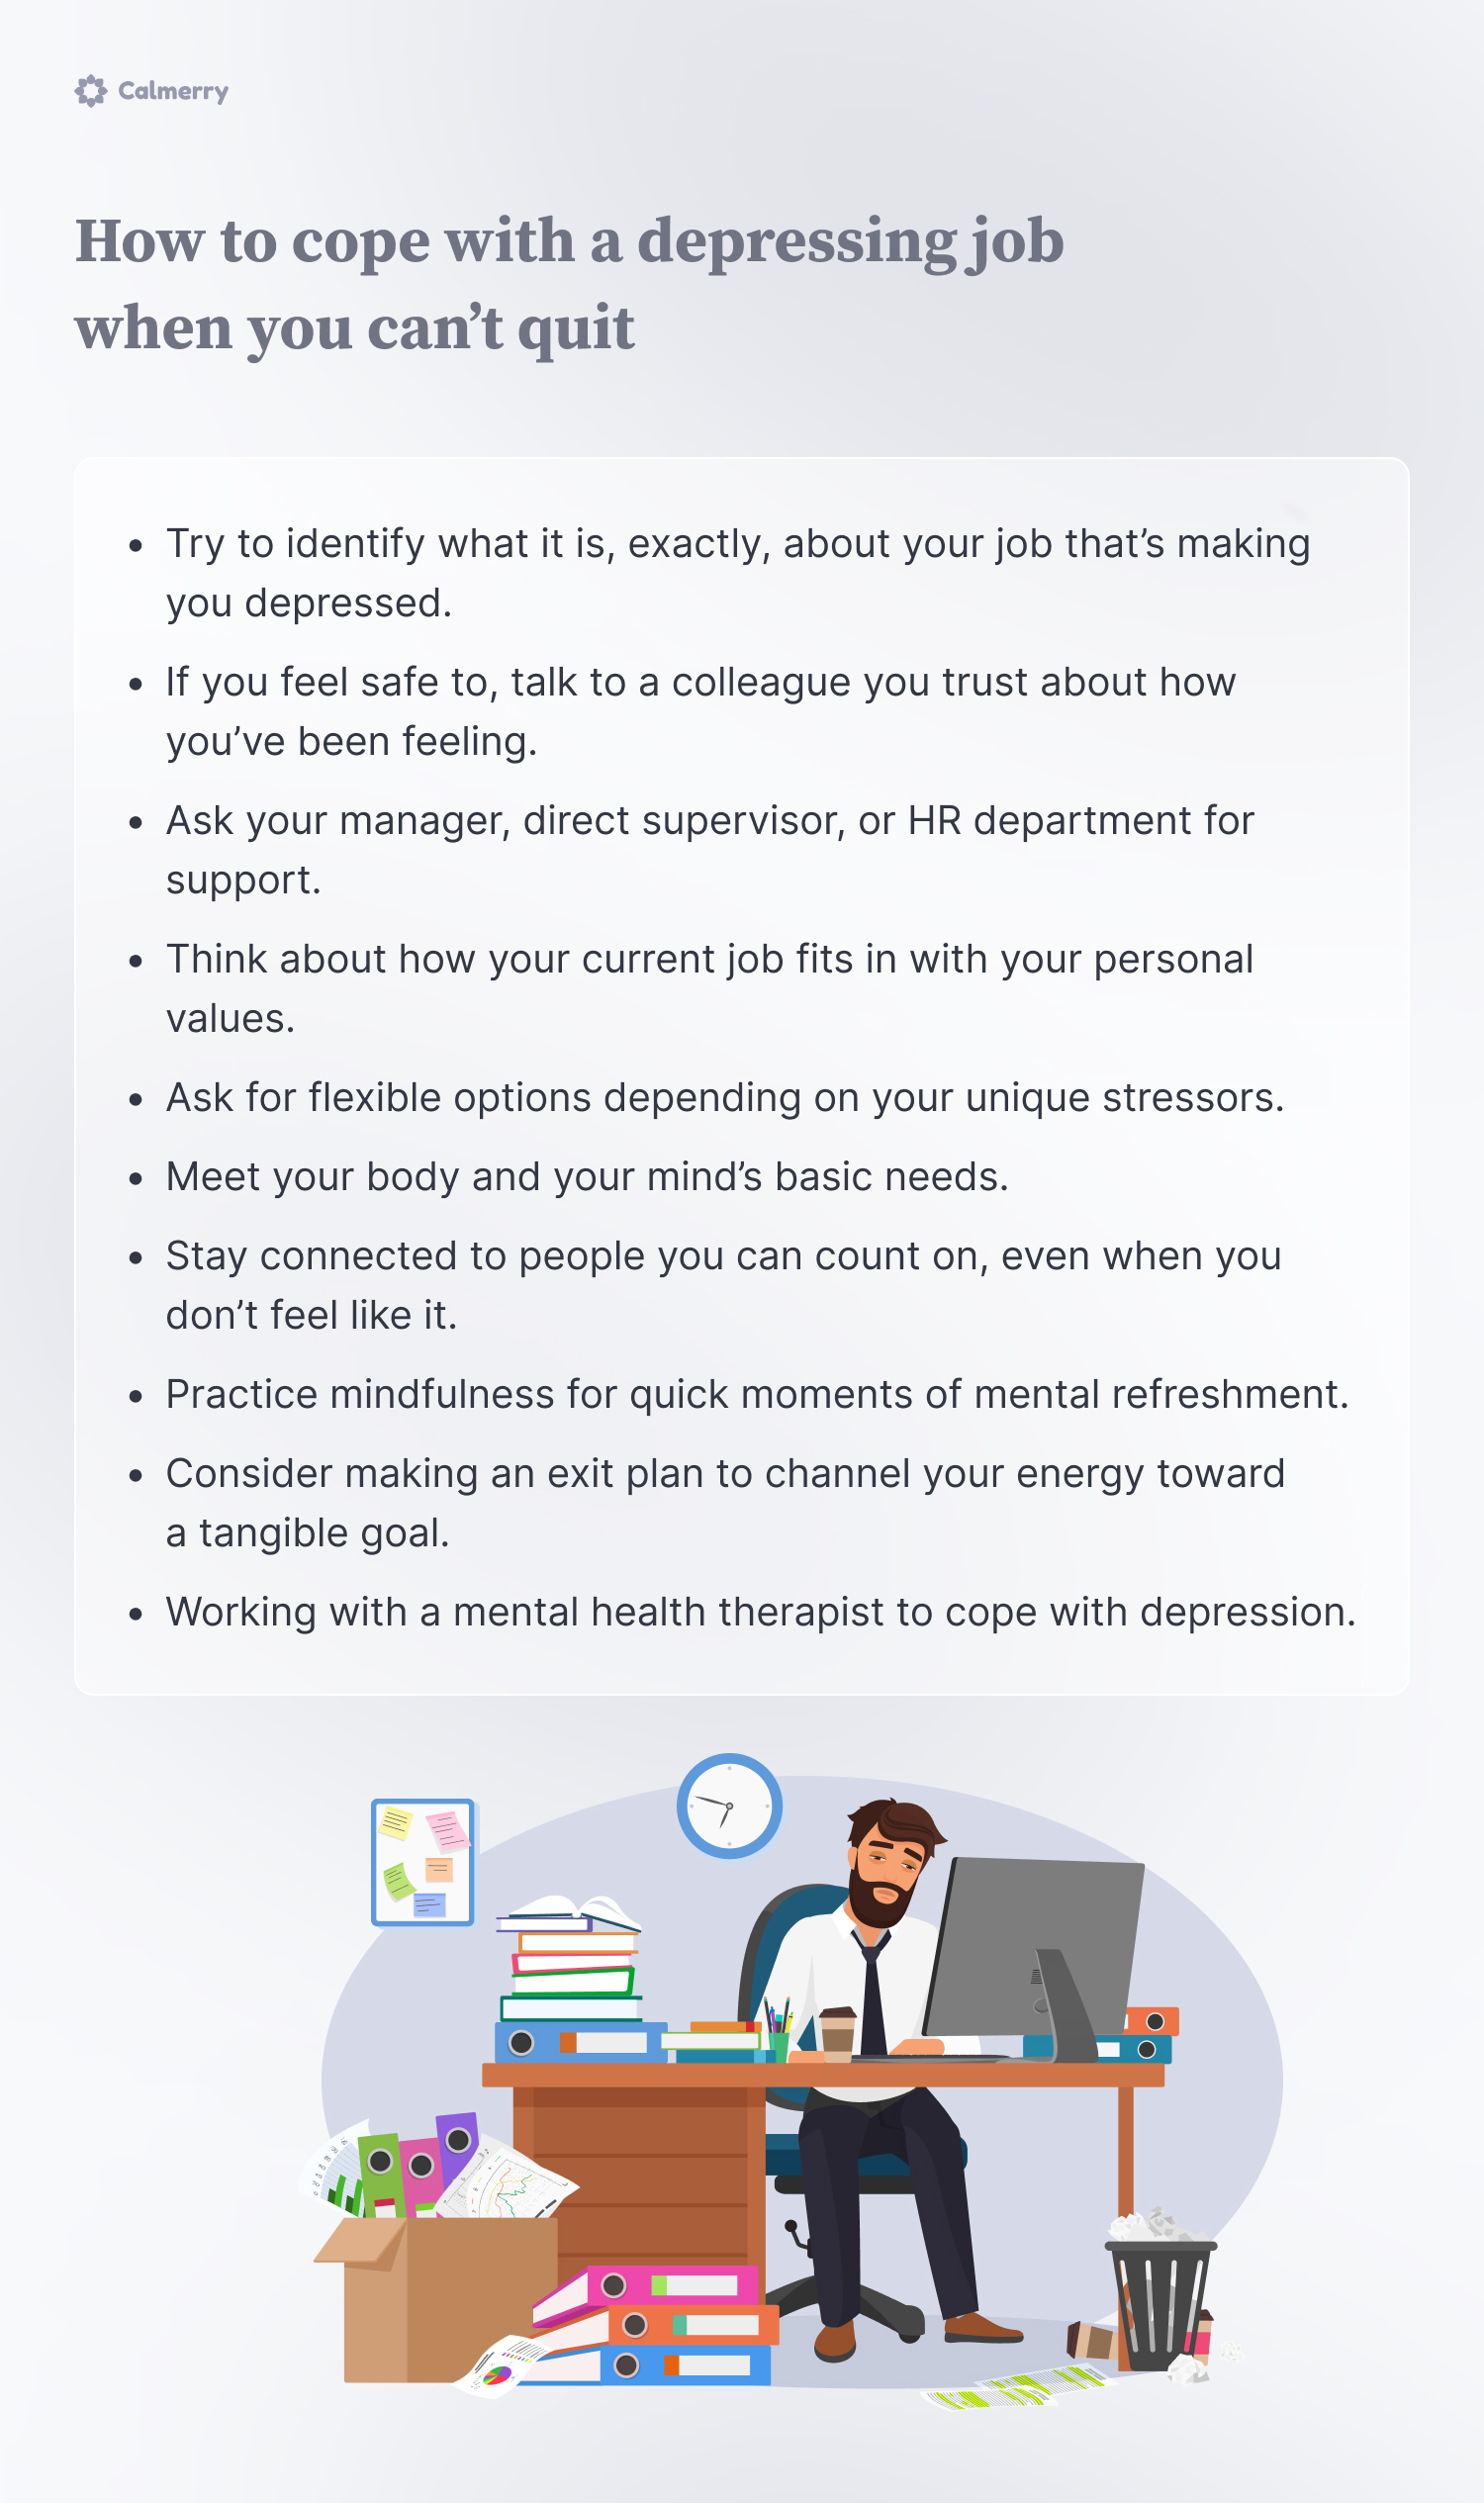 How to cope with a depressing job when you can’t quit
Try to identify what it is, exactly, about your job that’s making you depressed
If you feel safe to, talk to a colleague you trust about how you’ve been feeling
Ask your manager, direct supervisor, or HR department for support
Think about how your current job fits in with your personal values
Ask for flexible options depending on your unique stressors
Meet your body and your mind’s basic needs
Stay connected to people you can count on, even when you don’t feel like it
Practice mindfulness for quick moments of mental refreshment
Consider making an exit plan to channel your energy toward a tangible goal 
Working with a mental health therapist to cope with depression 